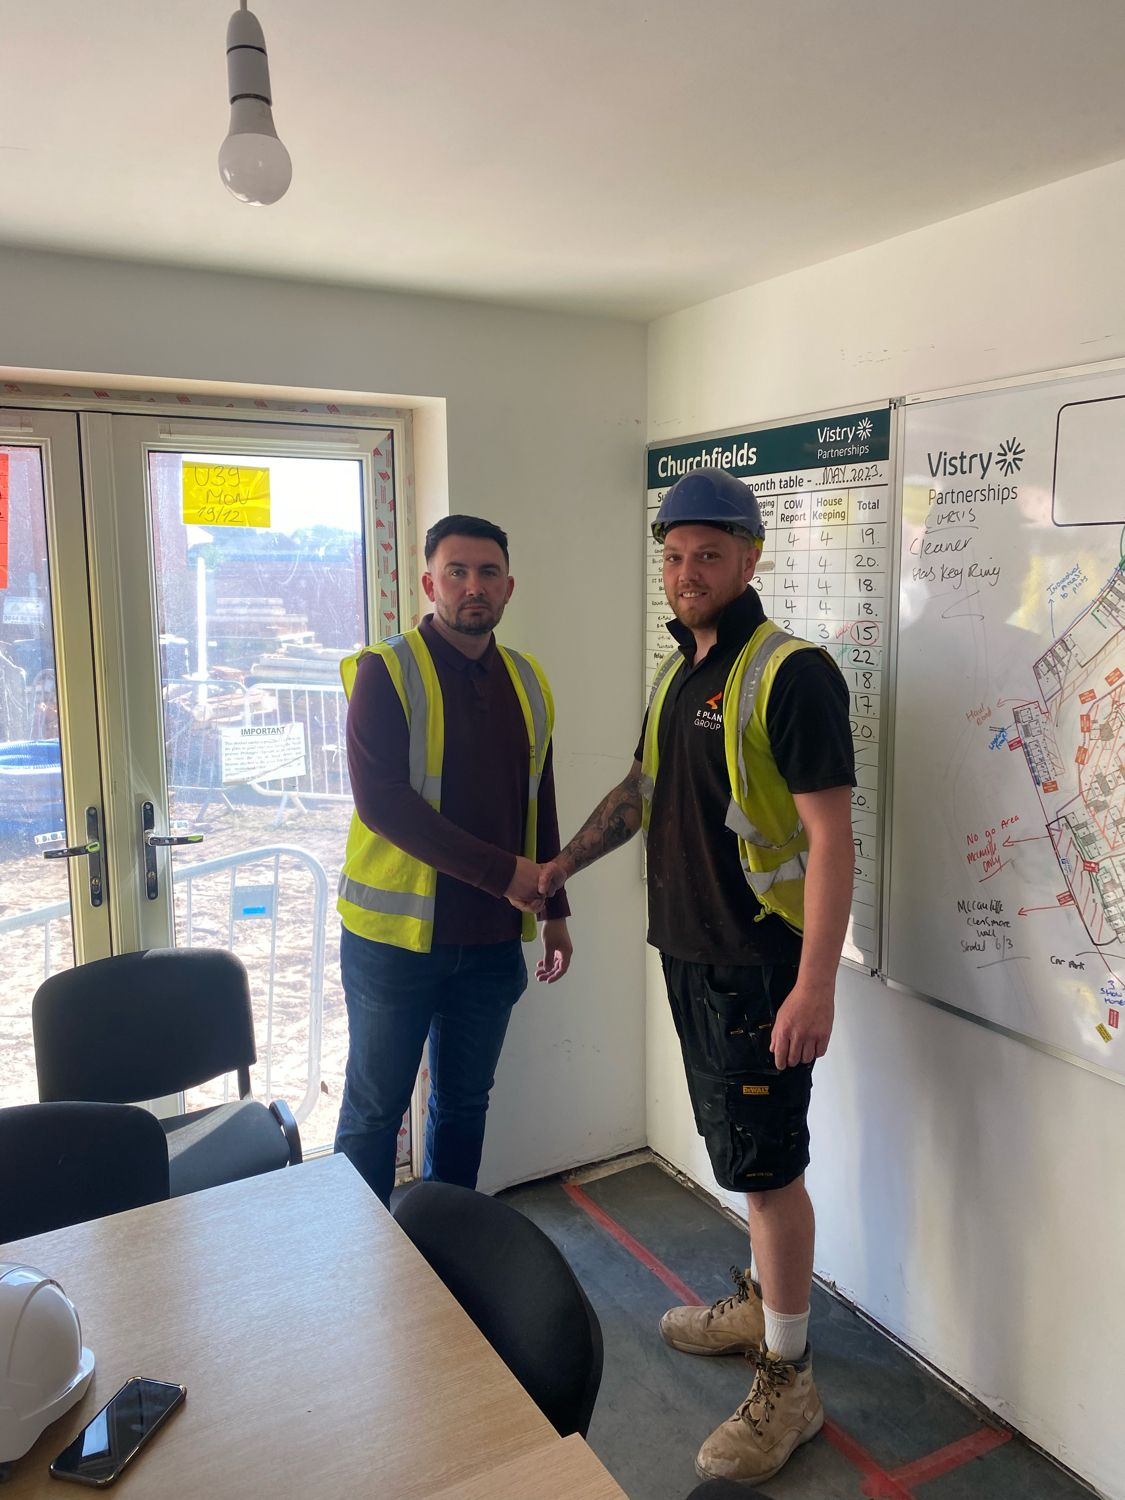 Contractor of the Month at Churchfields, Kidderminster Site, Vistry Partnerships